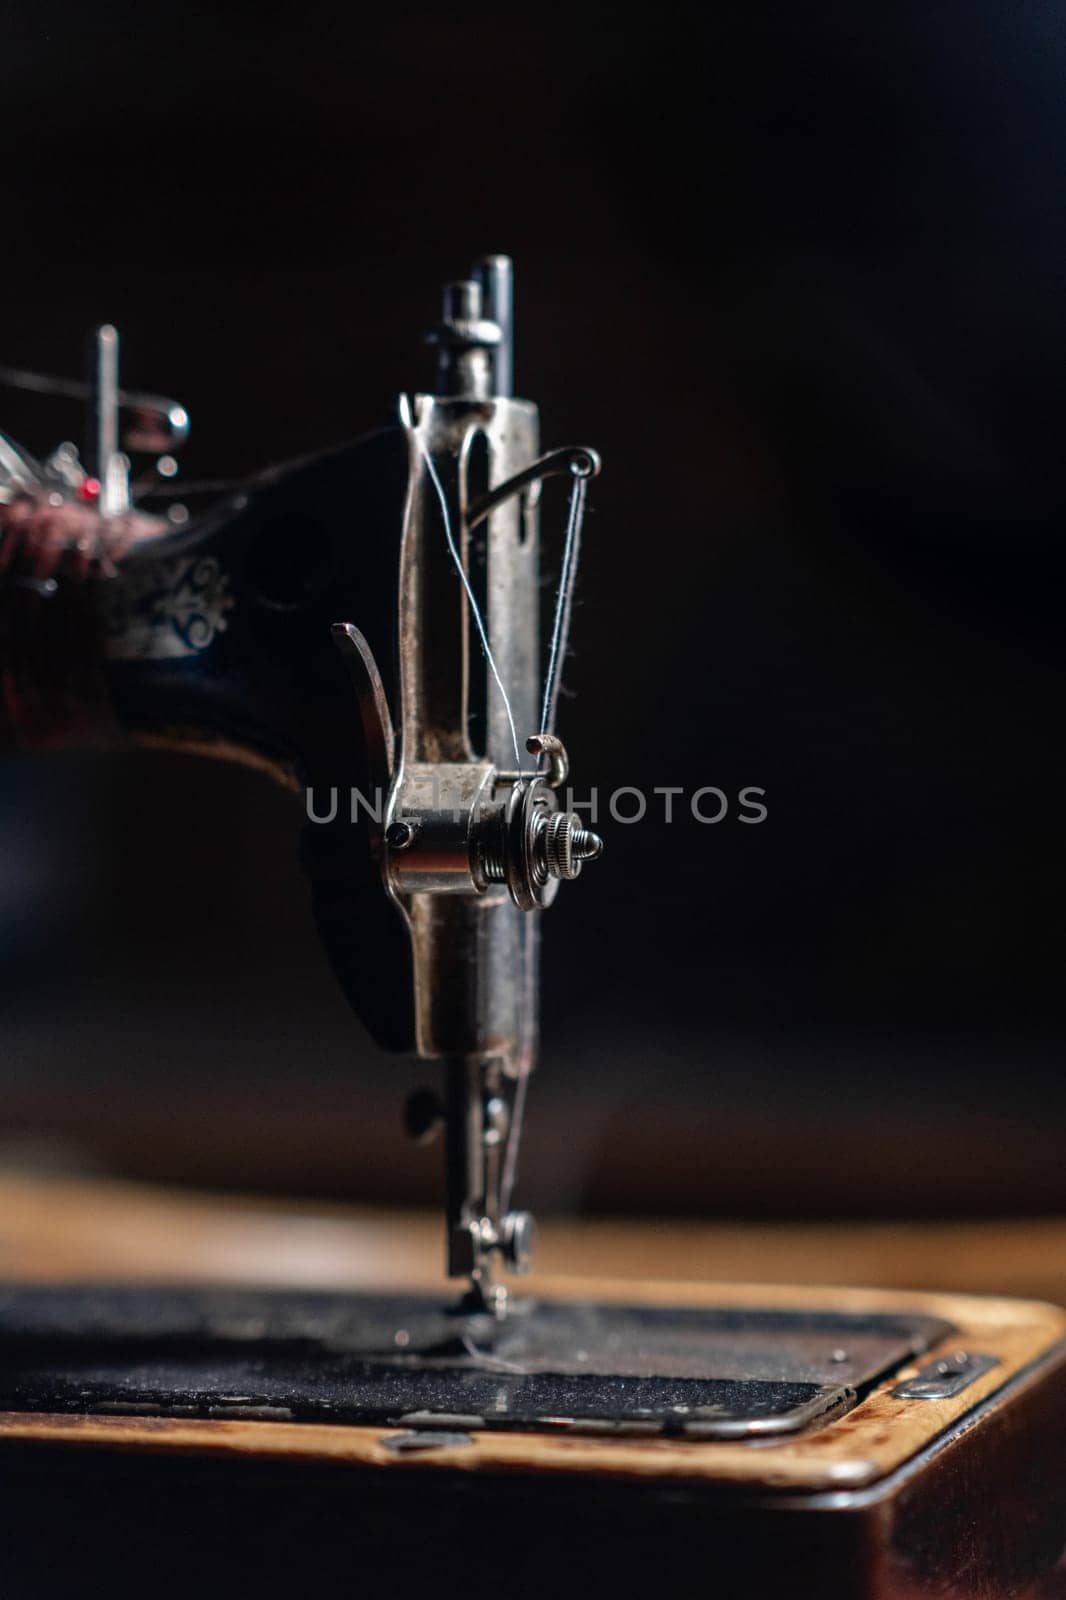 Old sewing machine stands on the table at home ready to work and sew. by AnatoliiFoto